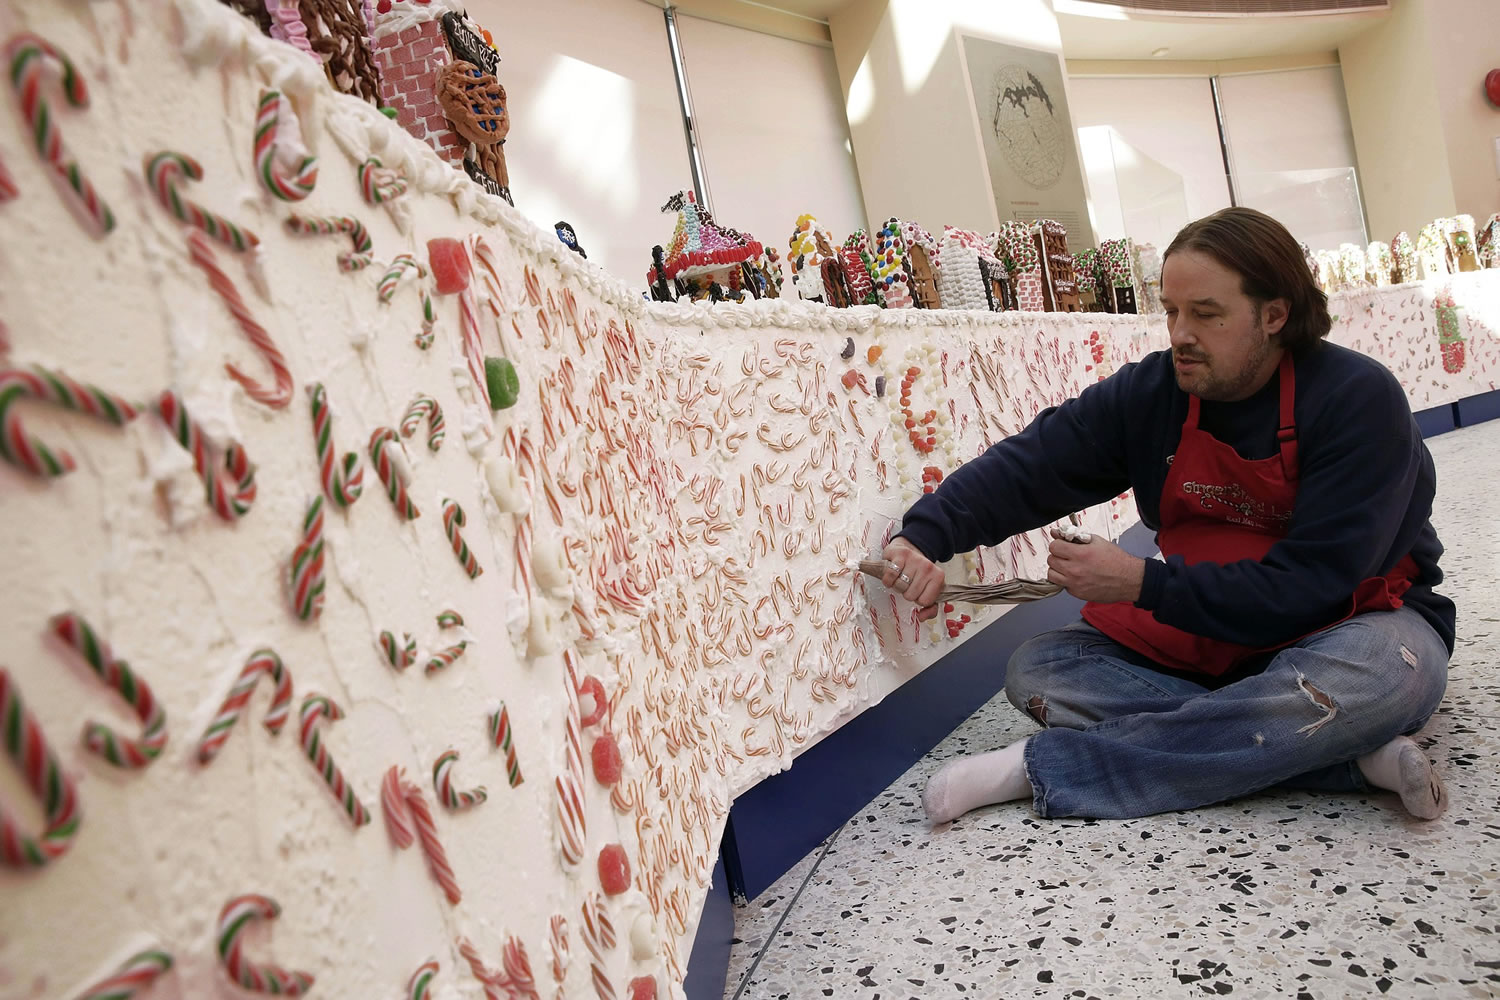 Chef Jon Lovitch uses a pastry bag of frosting Nov. 13 as he prepares the border for his GingerBread Lane display, at the New York Hall of Science, in the Queens borough of New York.